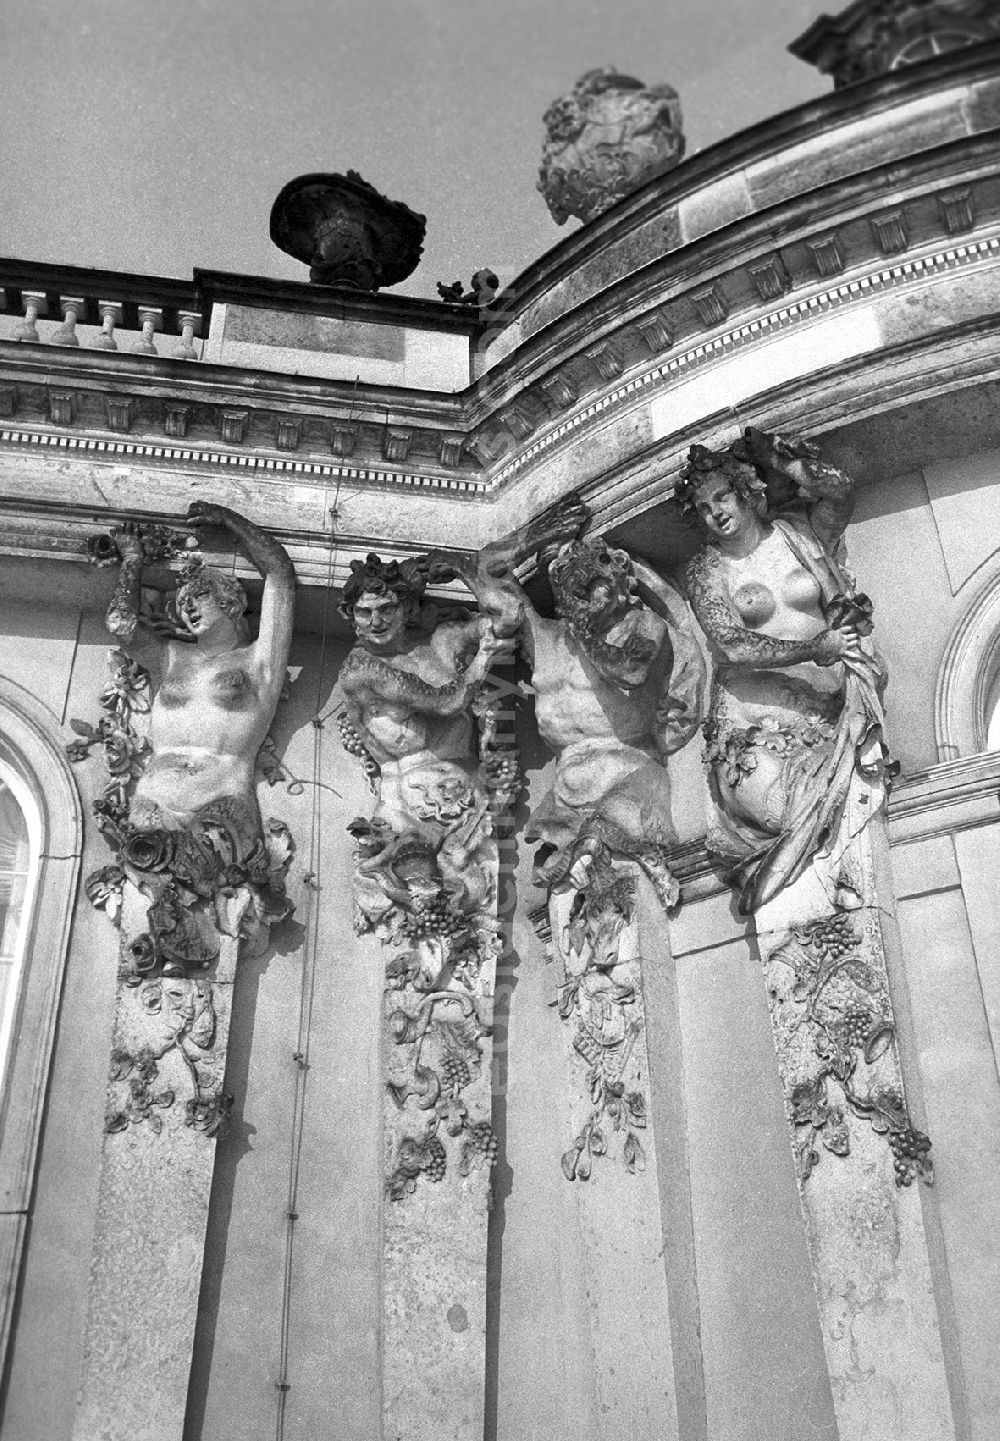 GDR image archive: Potsdam - Sandstone statues of the sculptor Friedrich Christian Glume in the form of Bacchantes at Sanssouci Palace in Potsdam